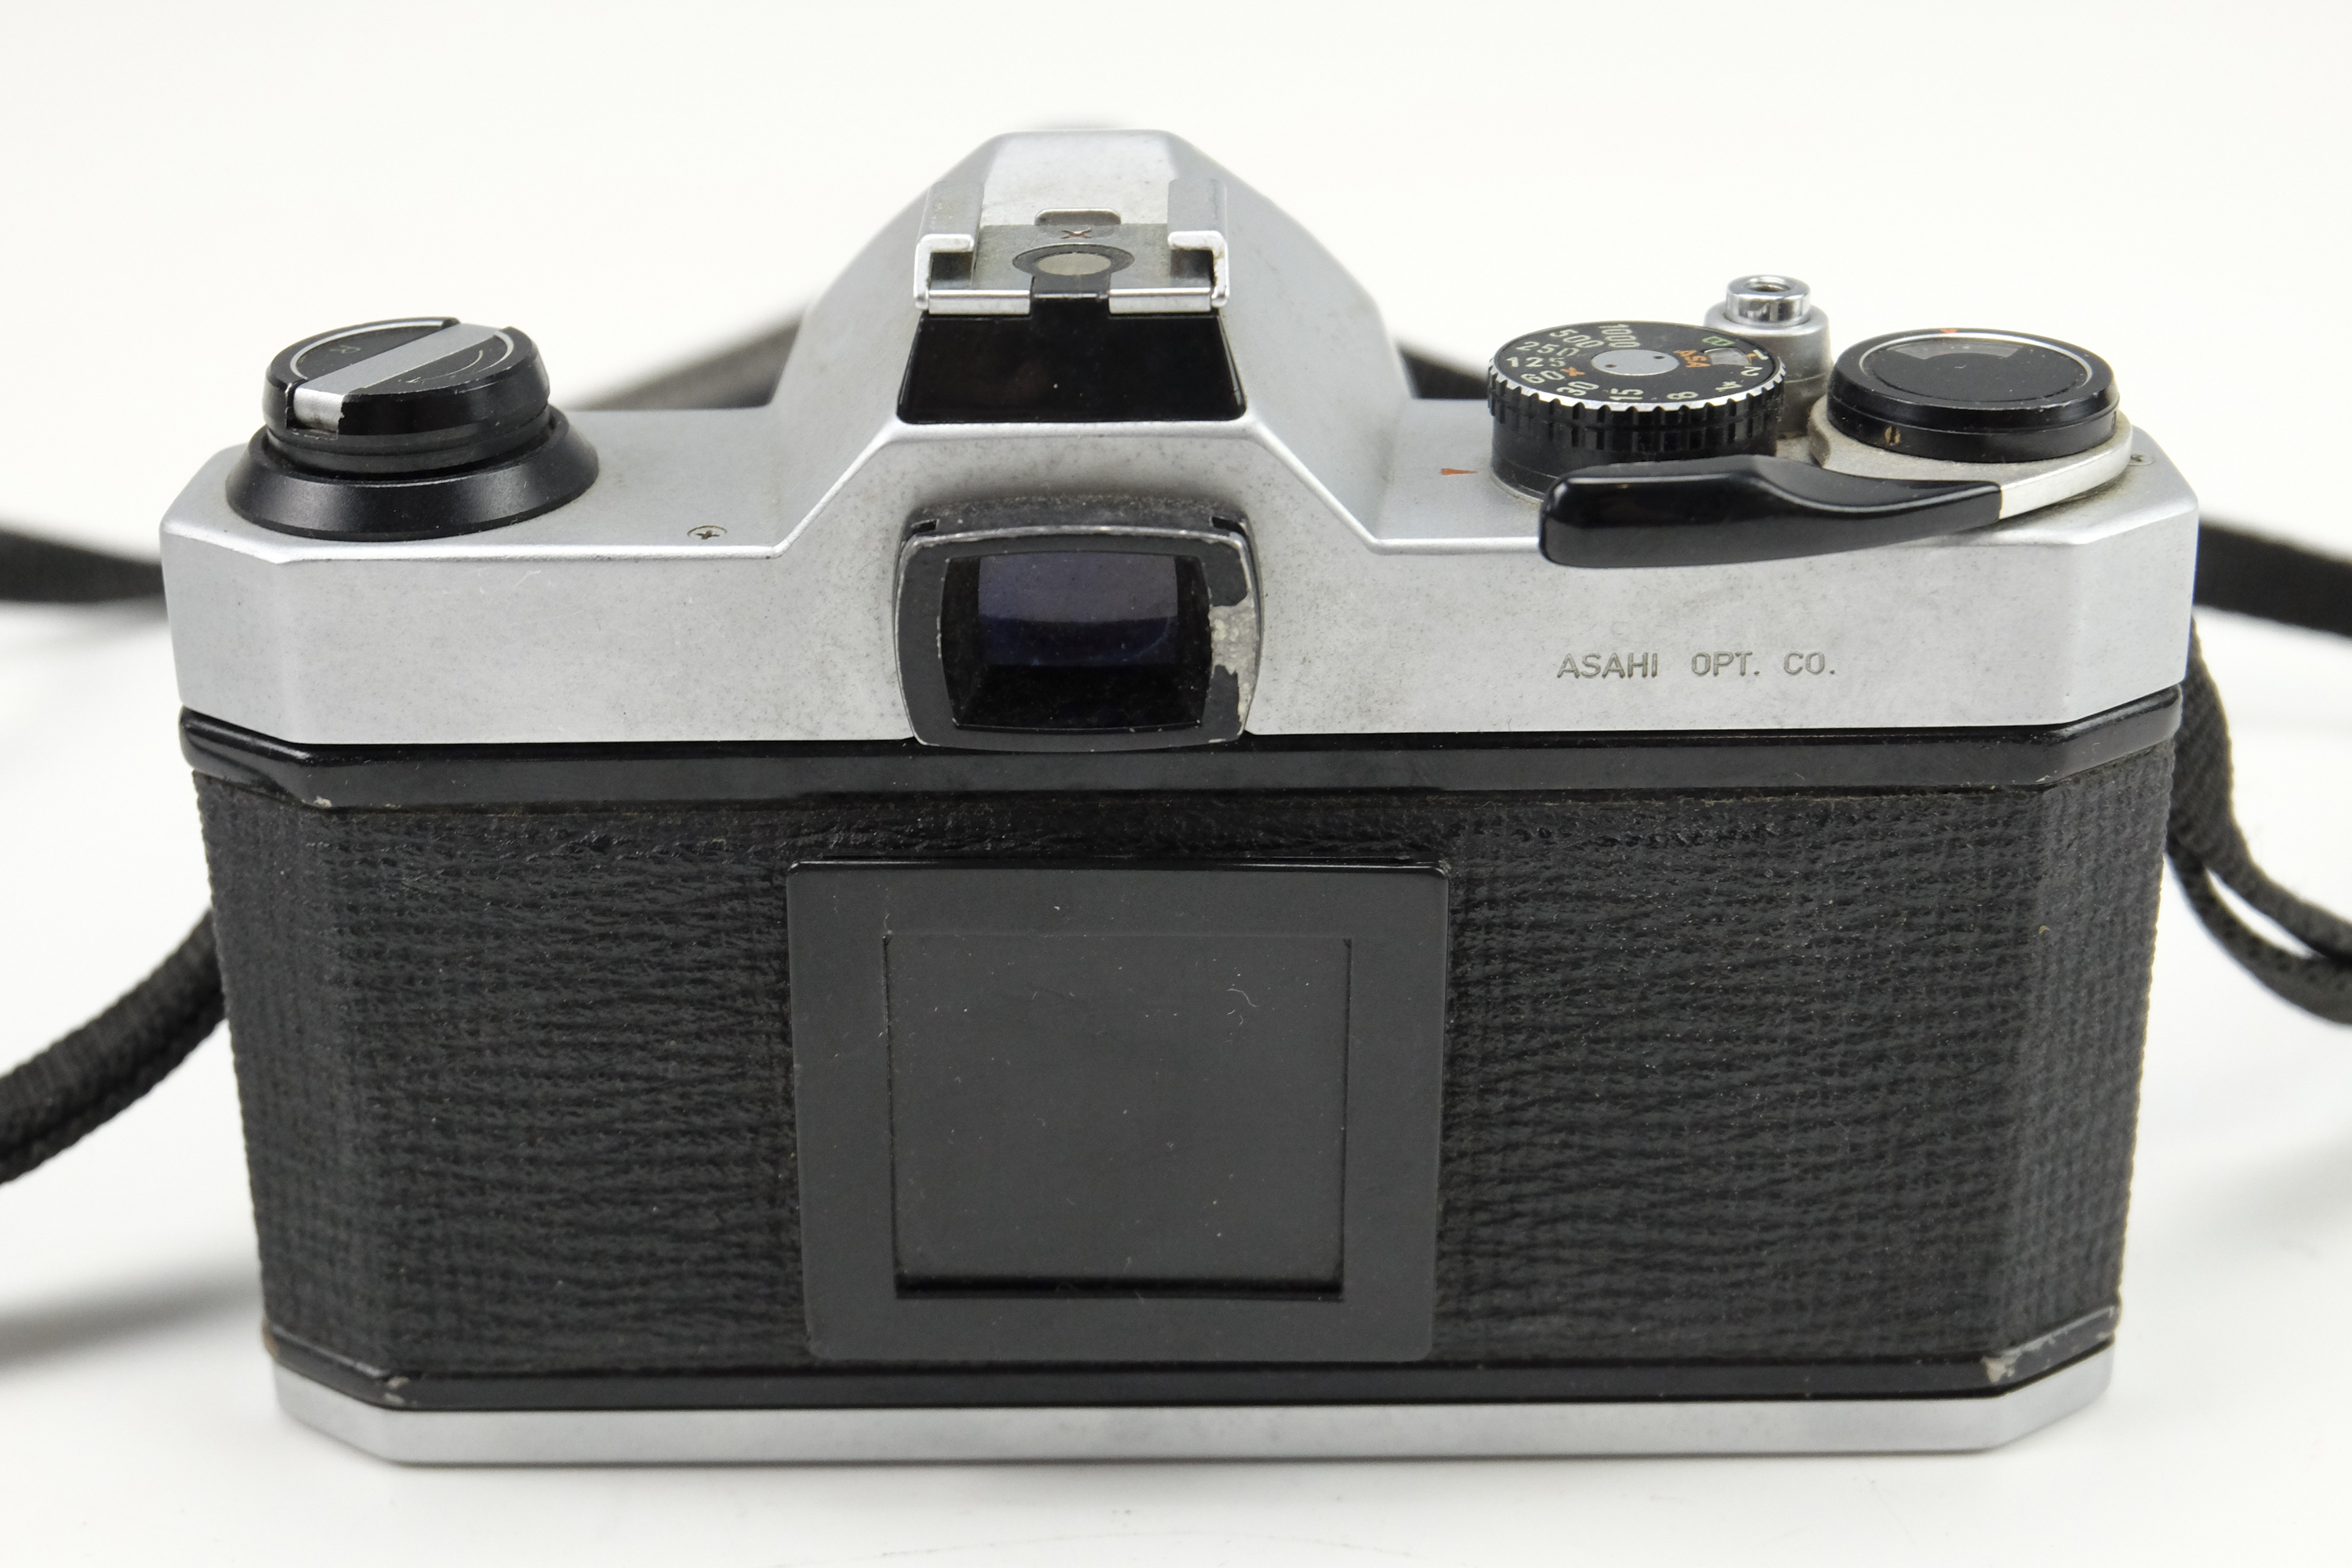 A Pentax K1000 film camera body together with a Pentax MEsuper, two Asahi Optical Co. lenses, a - Image 7 of 7